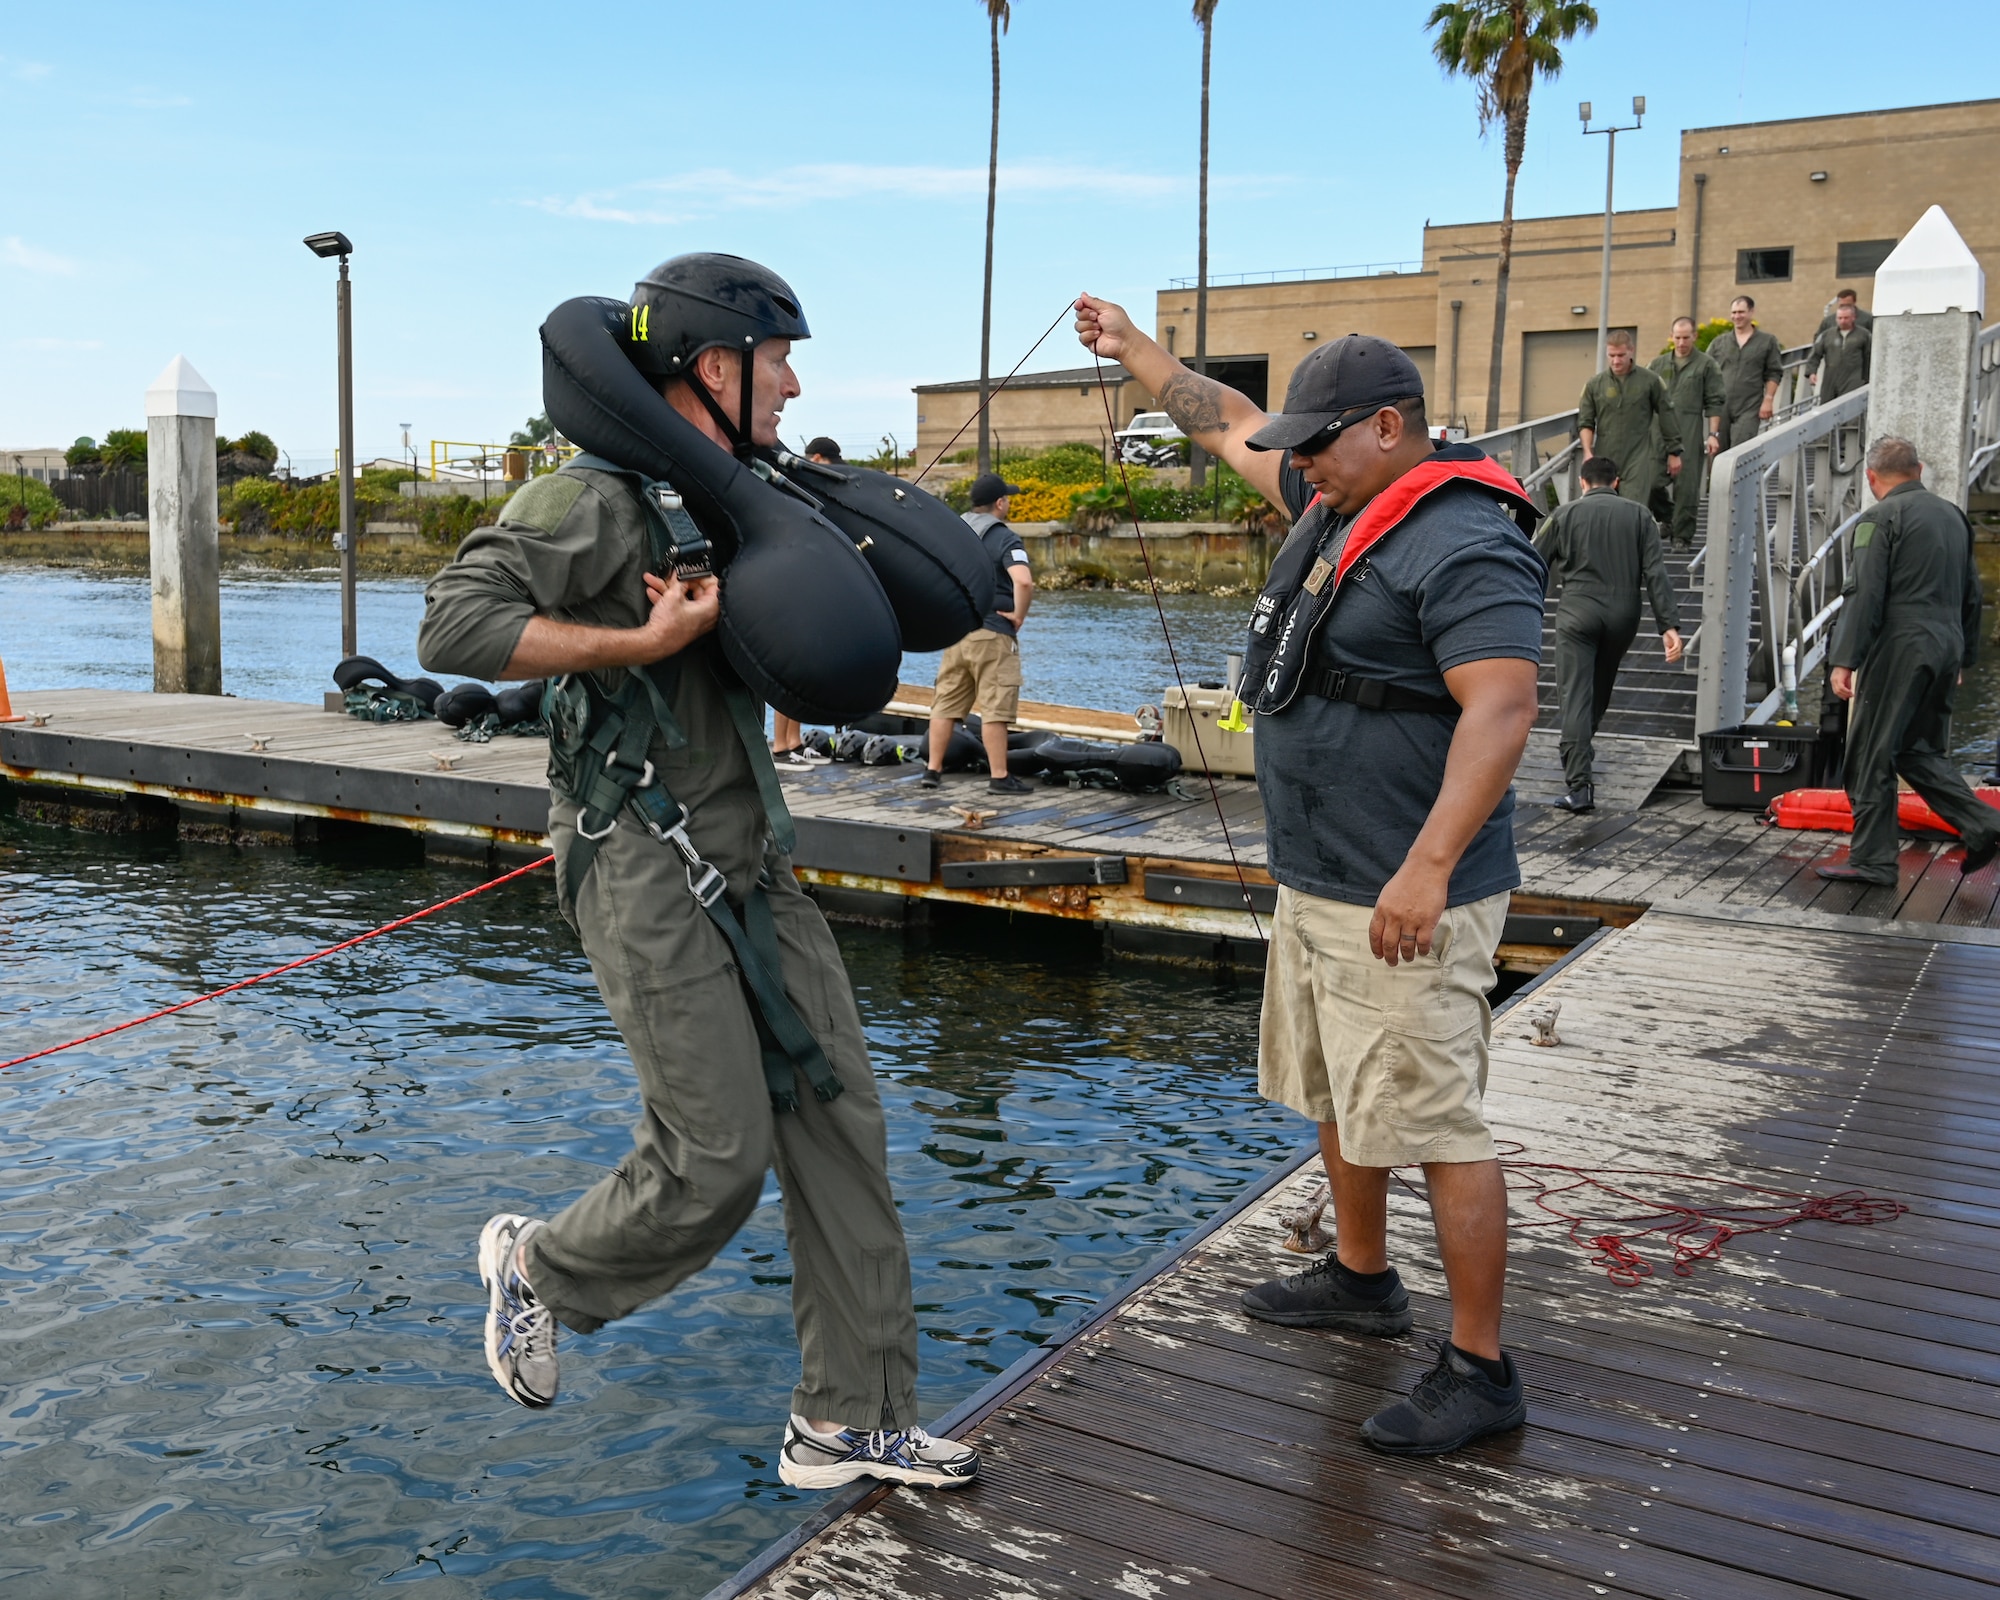 U.S. Air Force Brig. Gen. Jeffrey L. Butler, 162d Wing Commander, steps off the dock for the parachute drag portion of water survival training at Naval Amphibious Air Base Coronado in San Diego, July 10. Pilots must complete water survival training every three years to maintain combat readiness.  U.S. Air National Guard photo by Staff Sgt. Aubrey Pomares)